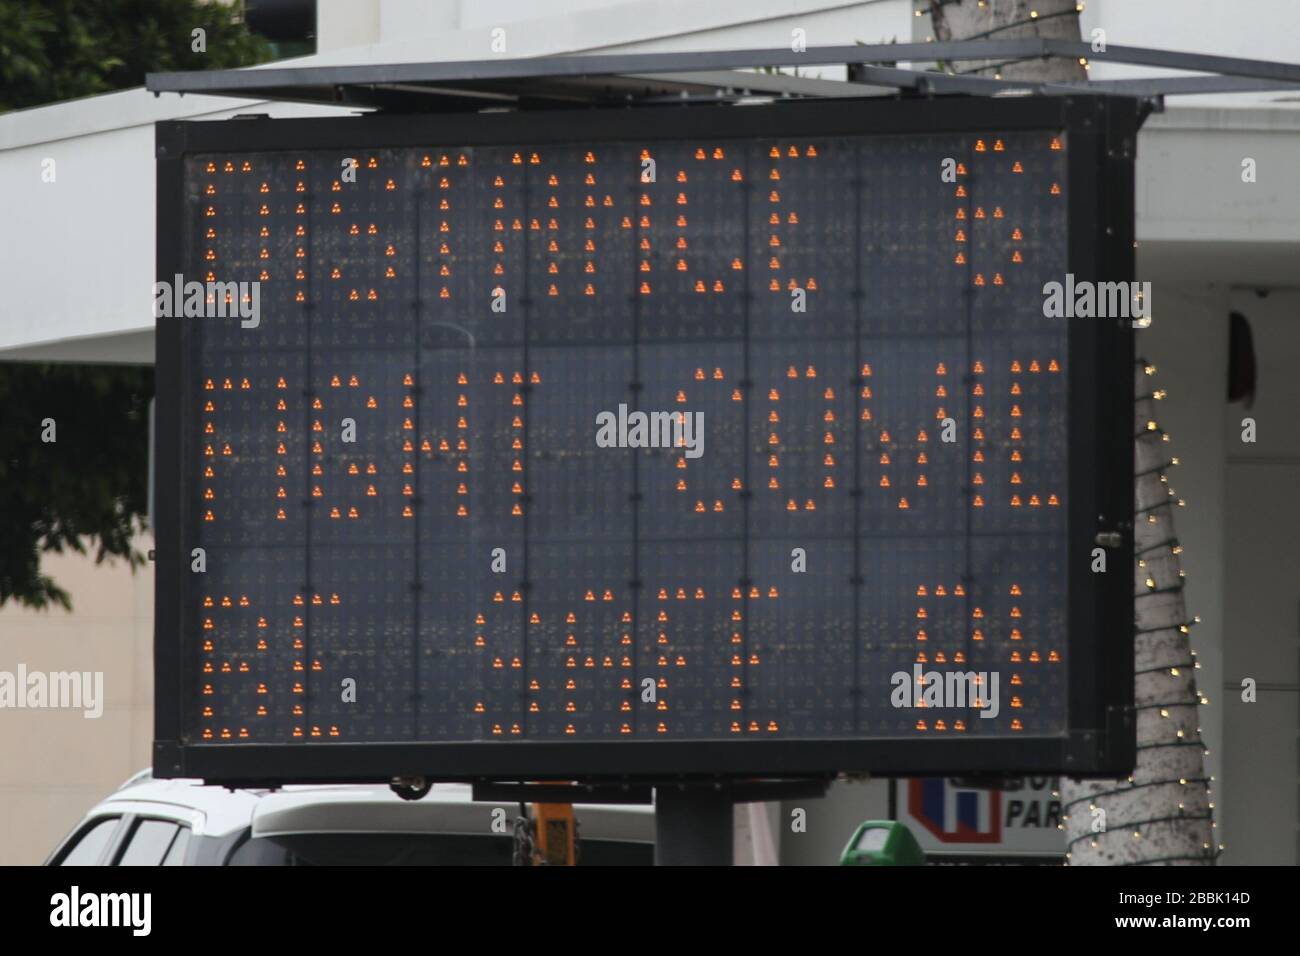 Beverly Hills, United States. 31st Mar, 2020. BEVERLY HILLS, LOS ANGELES, CALIFORNIA, USA - MARCH 31: A Caltrans Changeable Message Sign (CMS) warns motorists on N Canon Drive near the corner of N Santa Monica Blvd to stay at home, use to-go dining and distance 6 feet to fight the novel Coronavirus COVID-19 pandemic on March 31, 2020 in Beverly Hills, Los Angeles, California, United States. (Photo by Xavier Collin/Image Press Agency) Credit: Image Press Agency/Alamy Live News Stock Photo